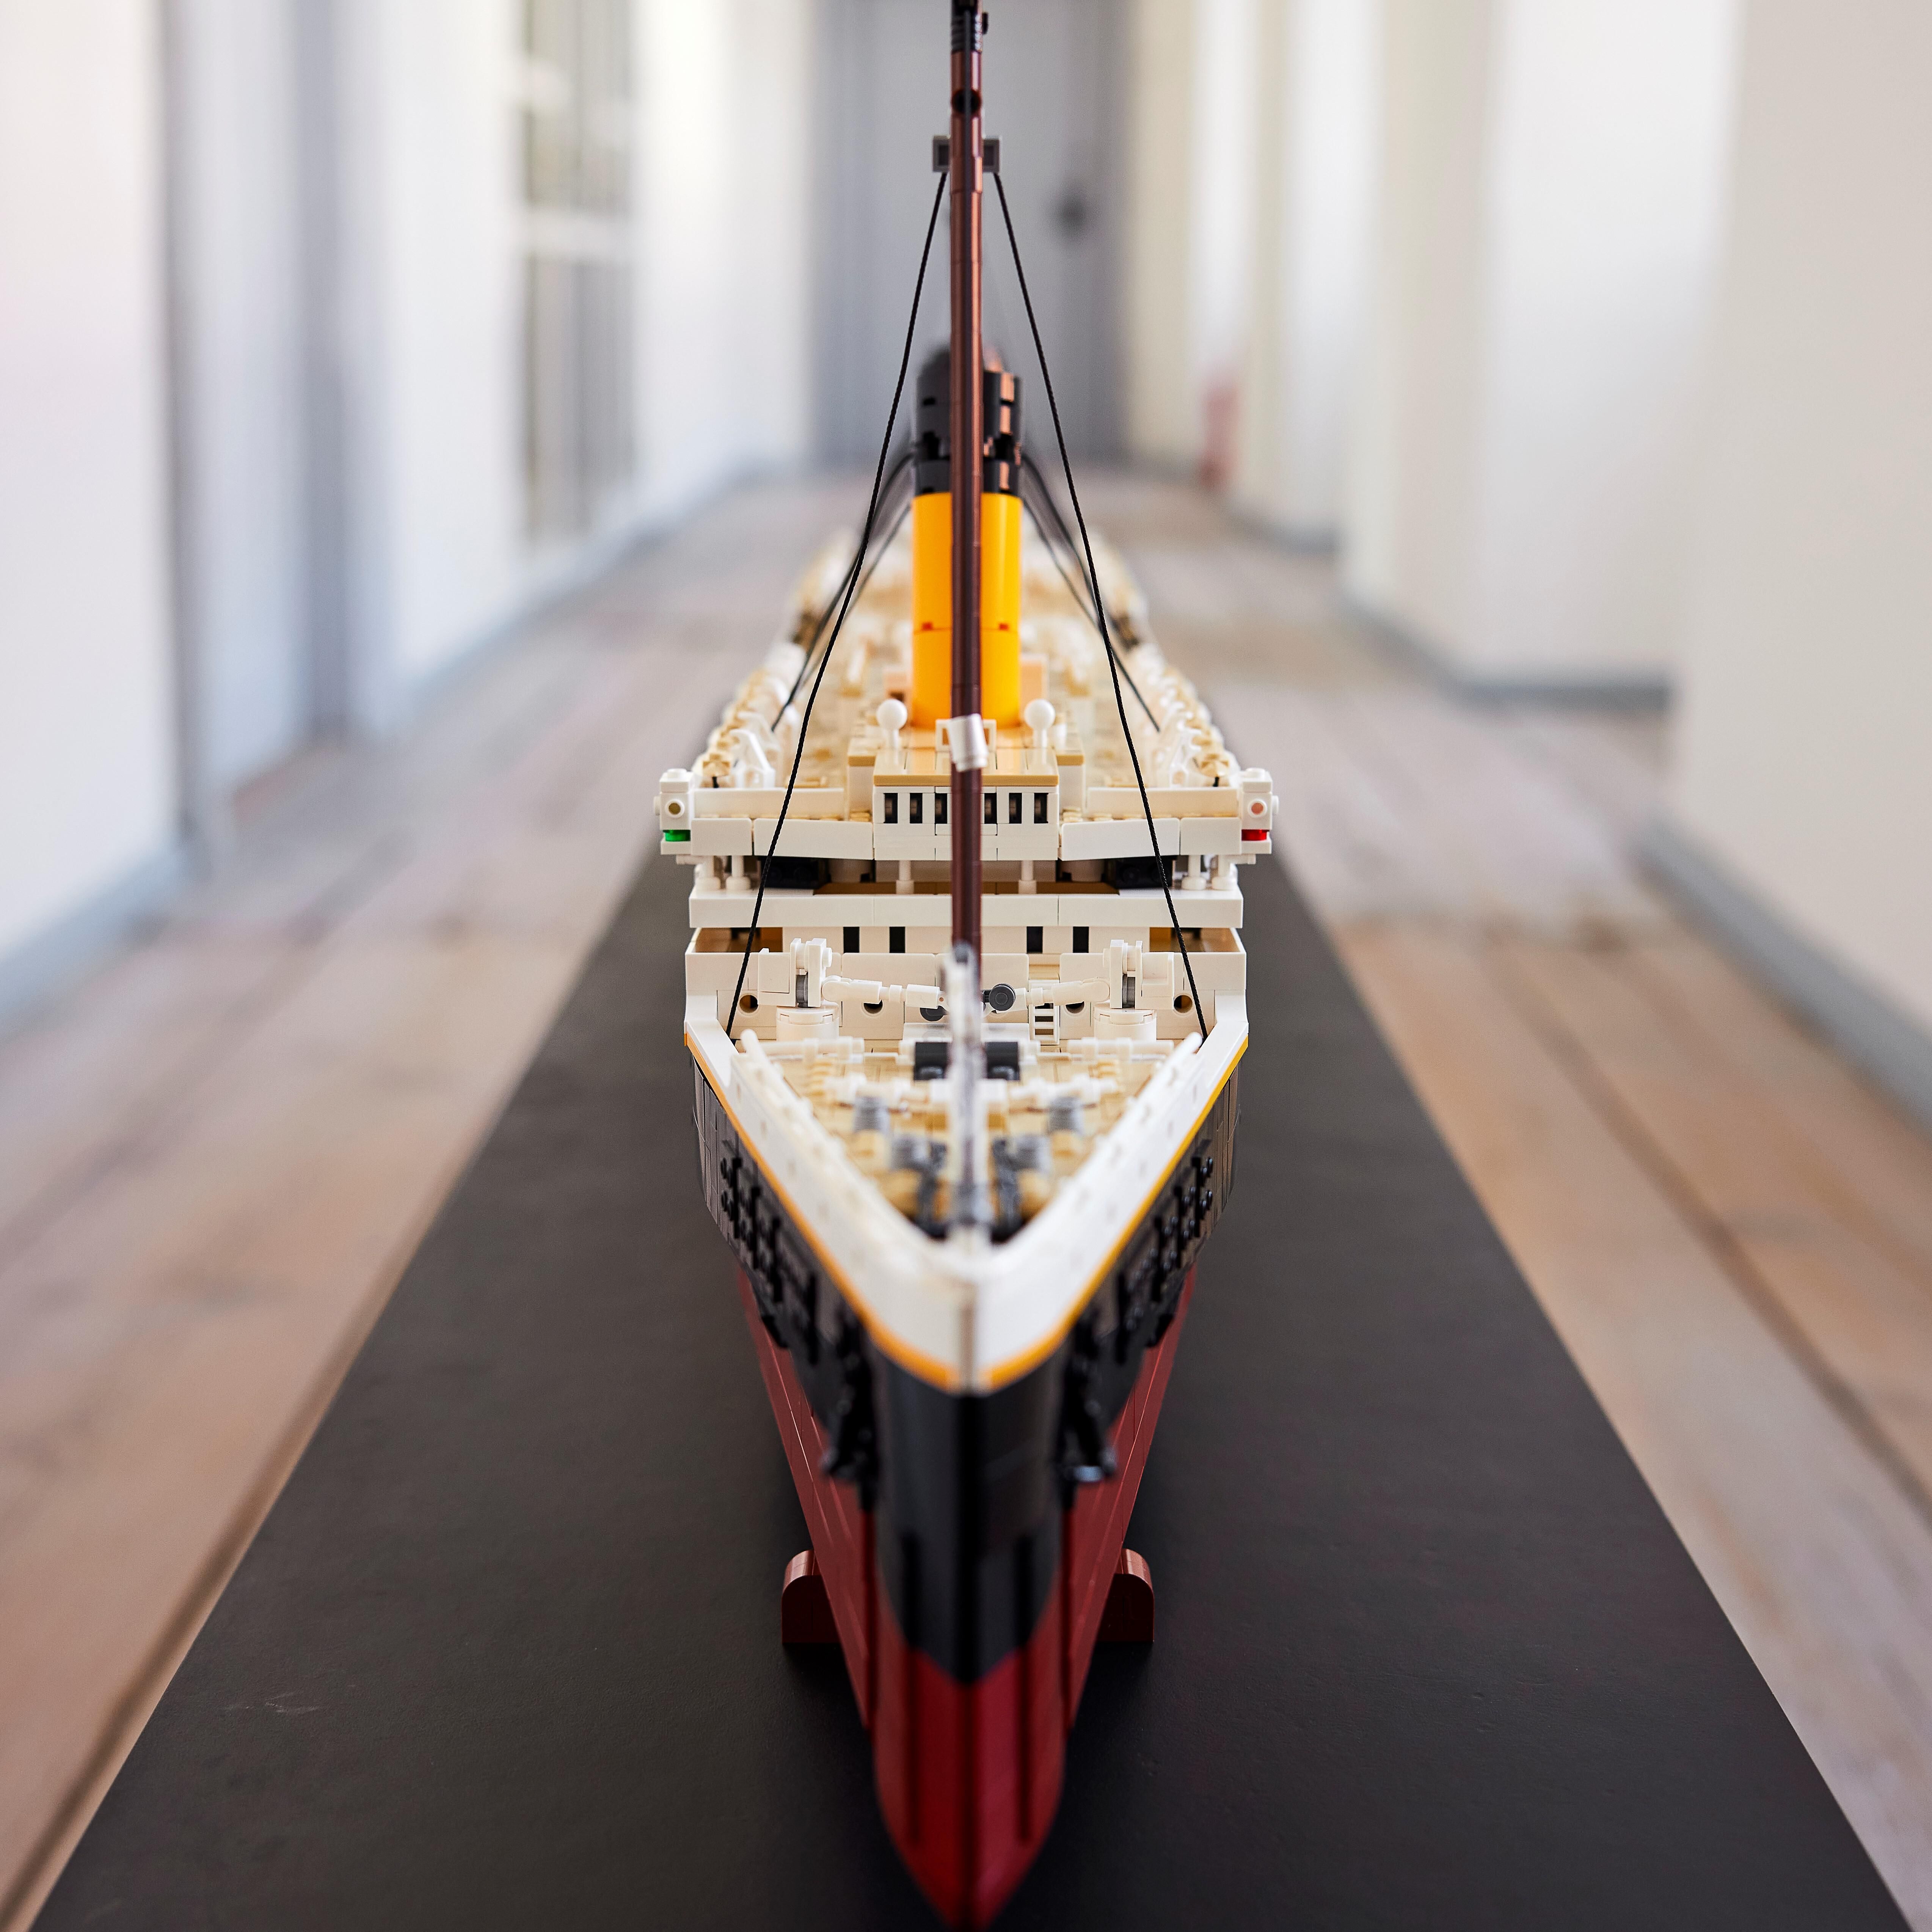 LEGO for Adults 10294 Titanic references an ex-designer